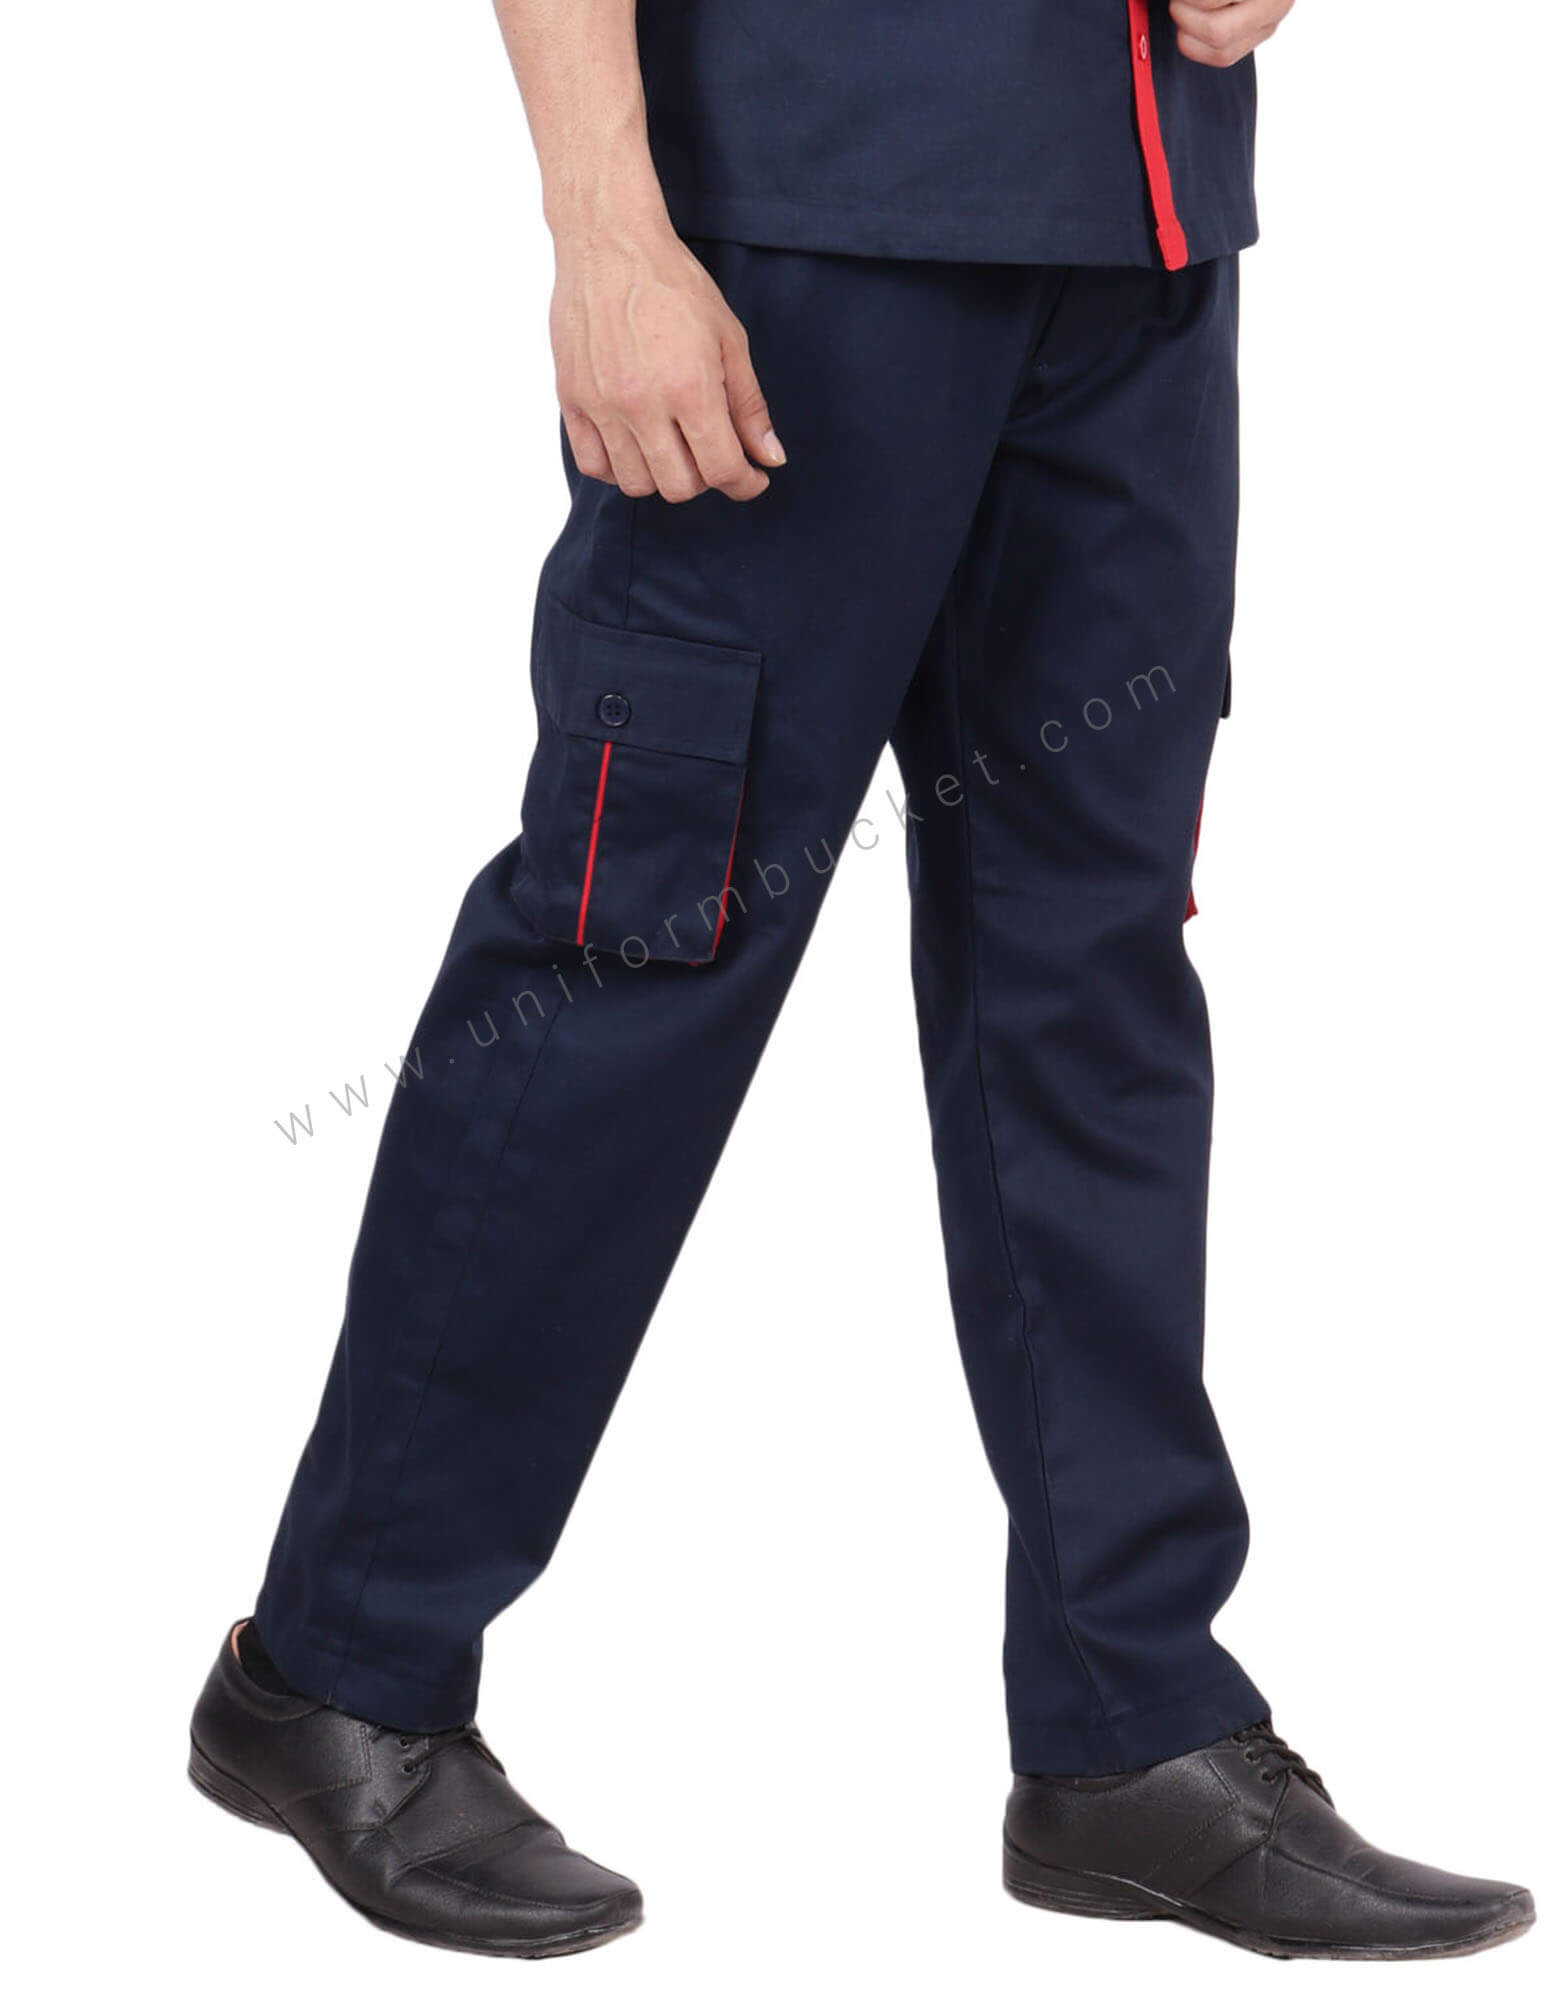 Blue Trousers  Buy Latest Blue Trousers Online in India  Myntra